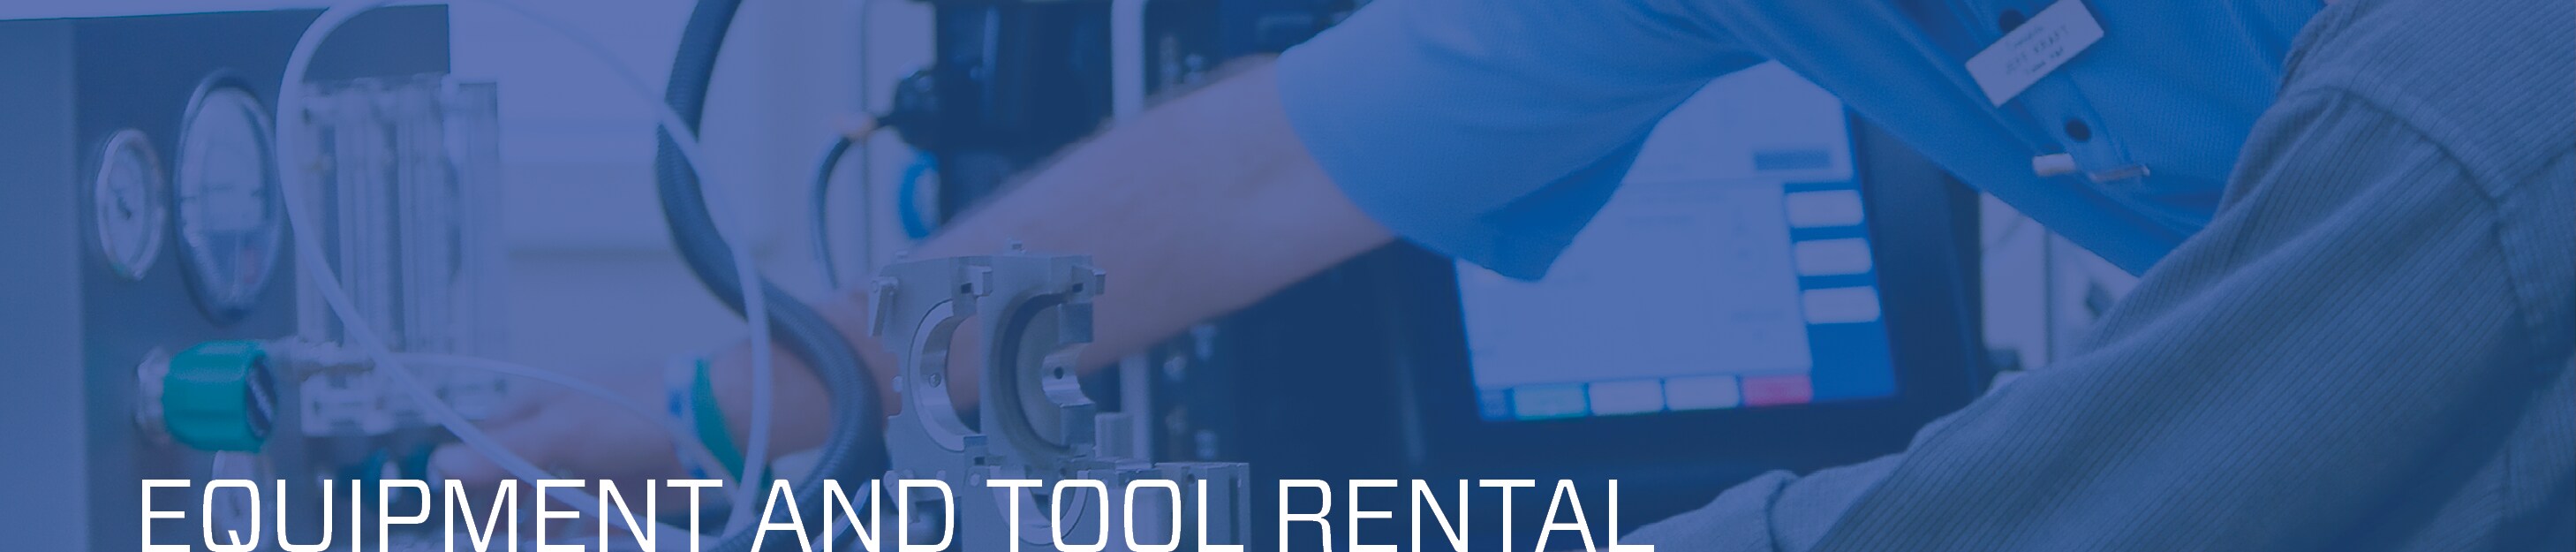 Equipment and Tool Rental